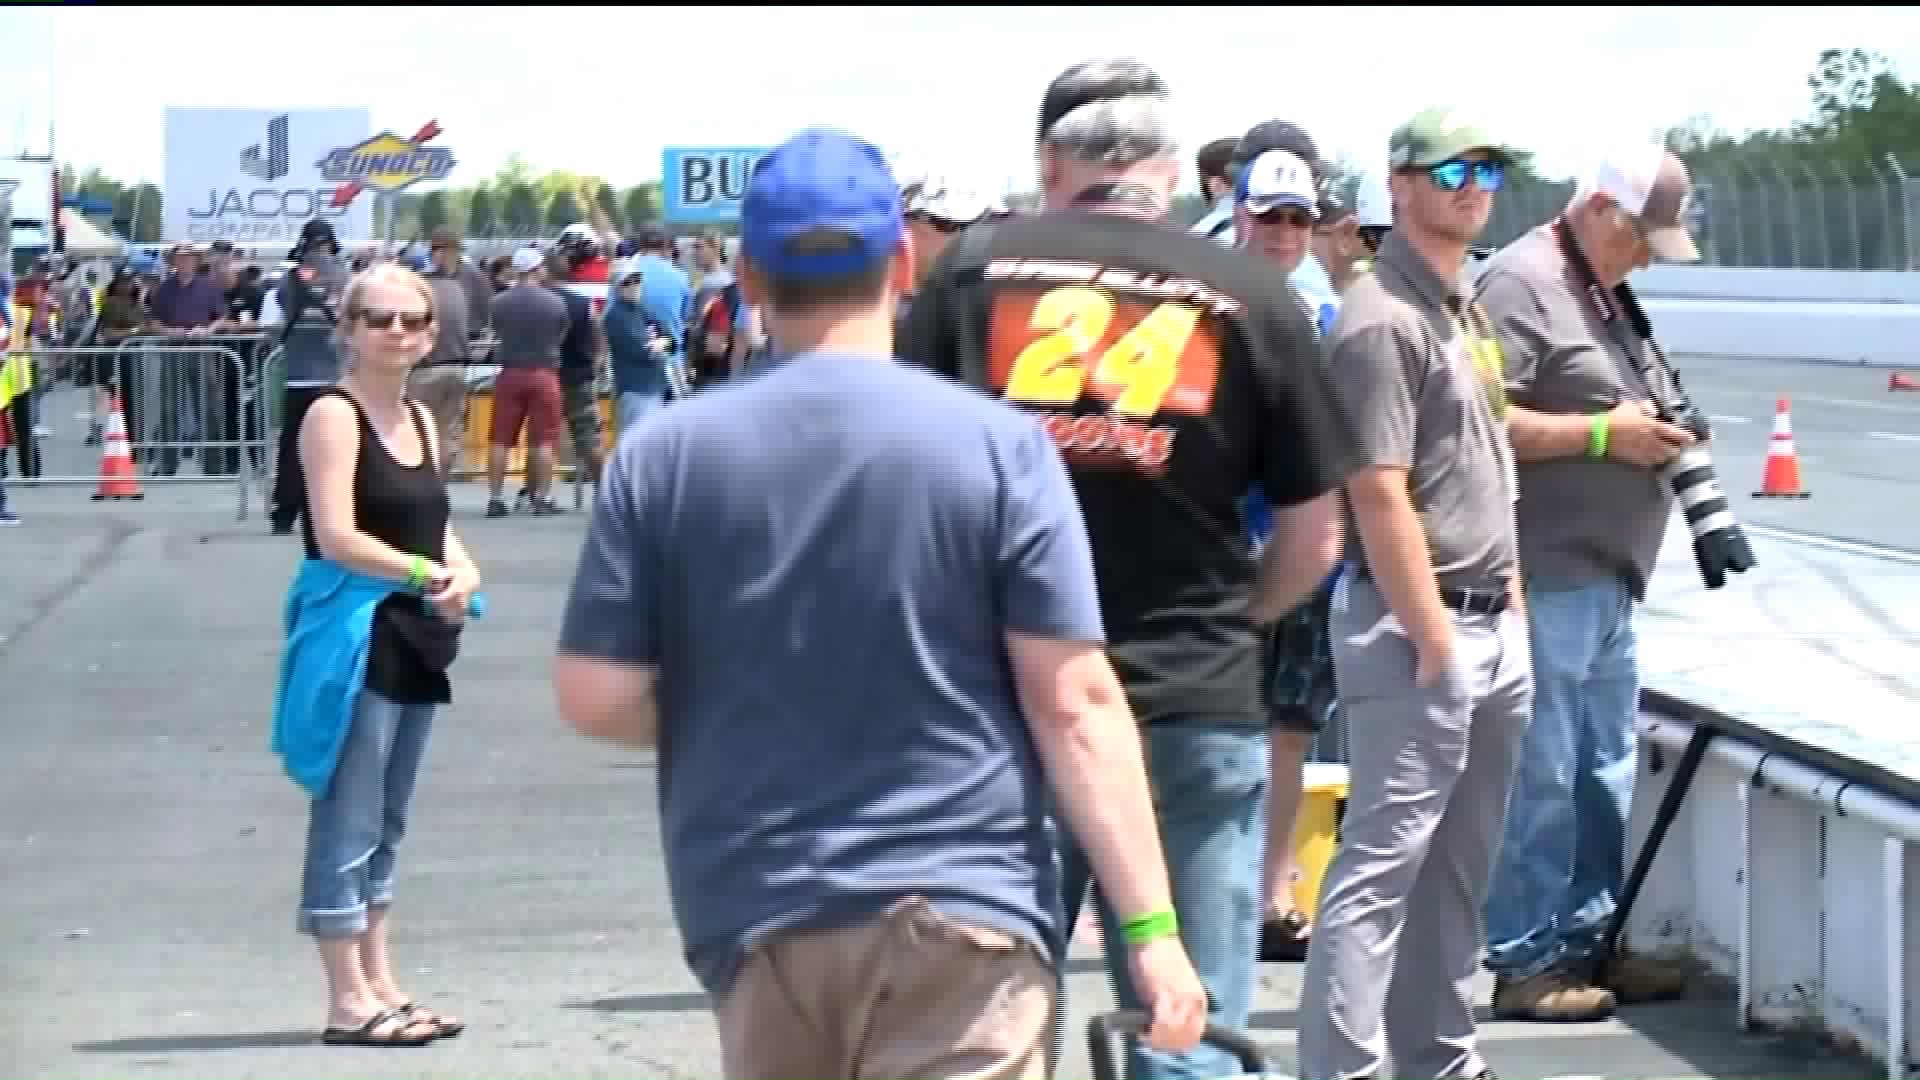 NASCAR Fans Excited for Race Weekend, Warm Weather